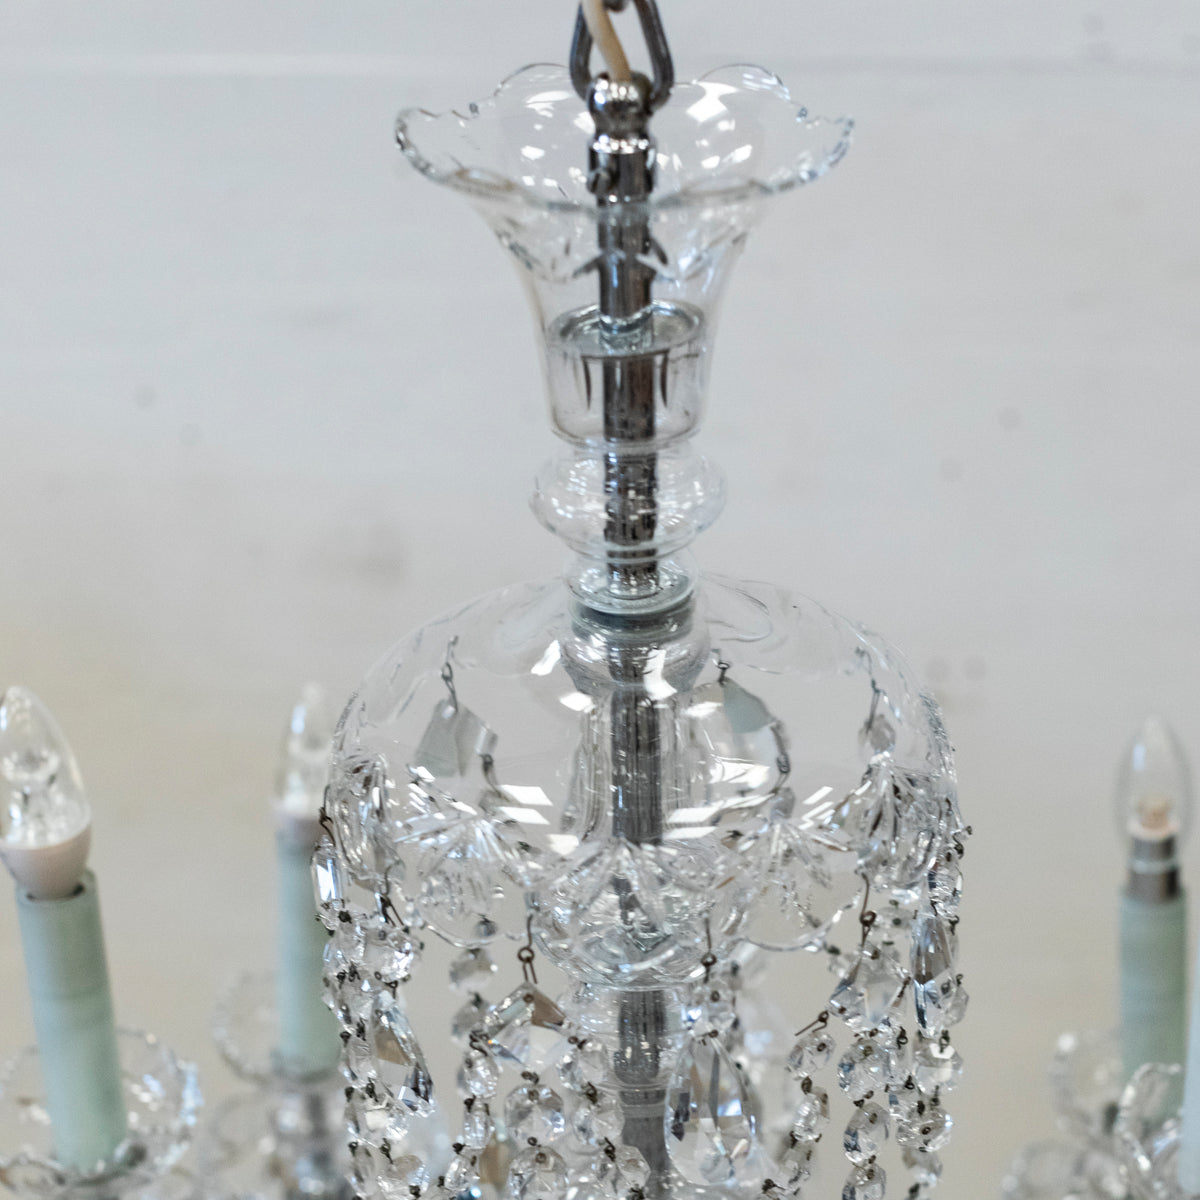 Large Reclaimed Crystal Chandelier | 12 Arm | The Architectural Forum